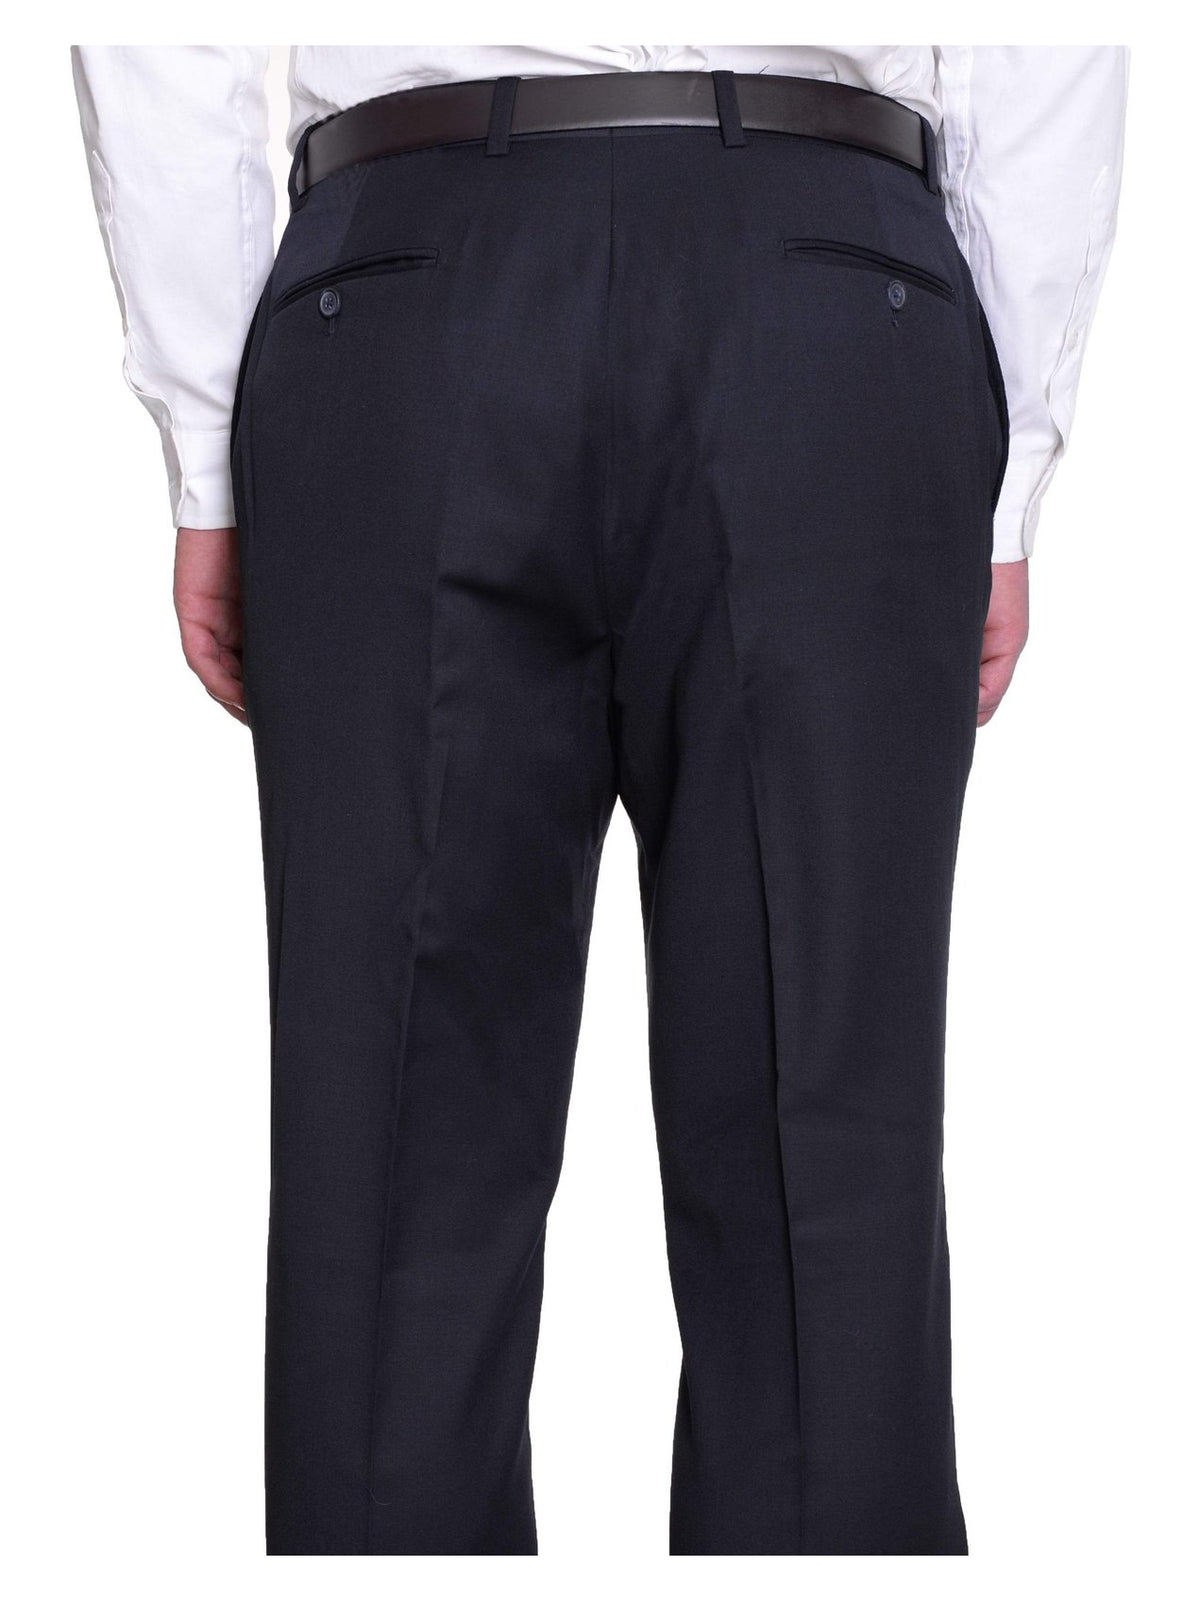 Tommy Hilfiger Mens Trim Fit Solid Navy Blue Flat Front Worsted Wool Dress Pants - The Suit Depot